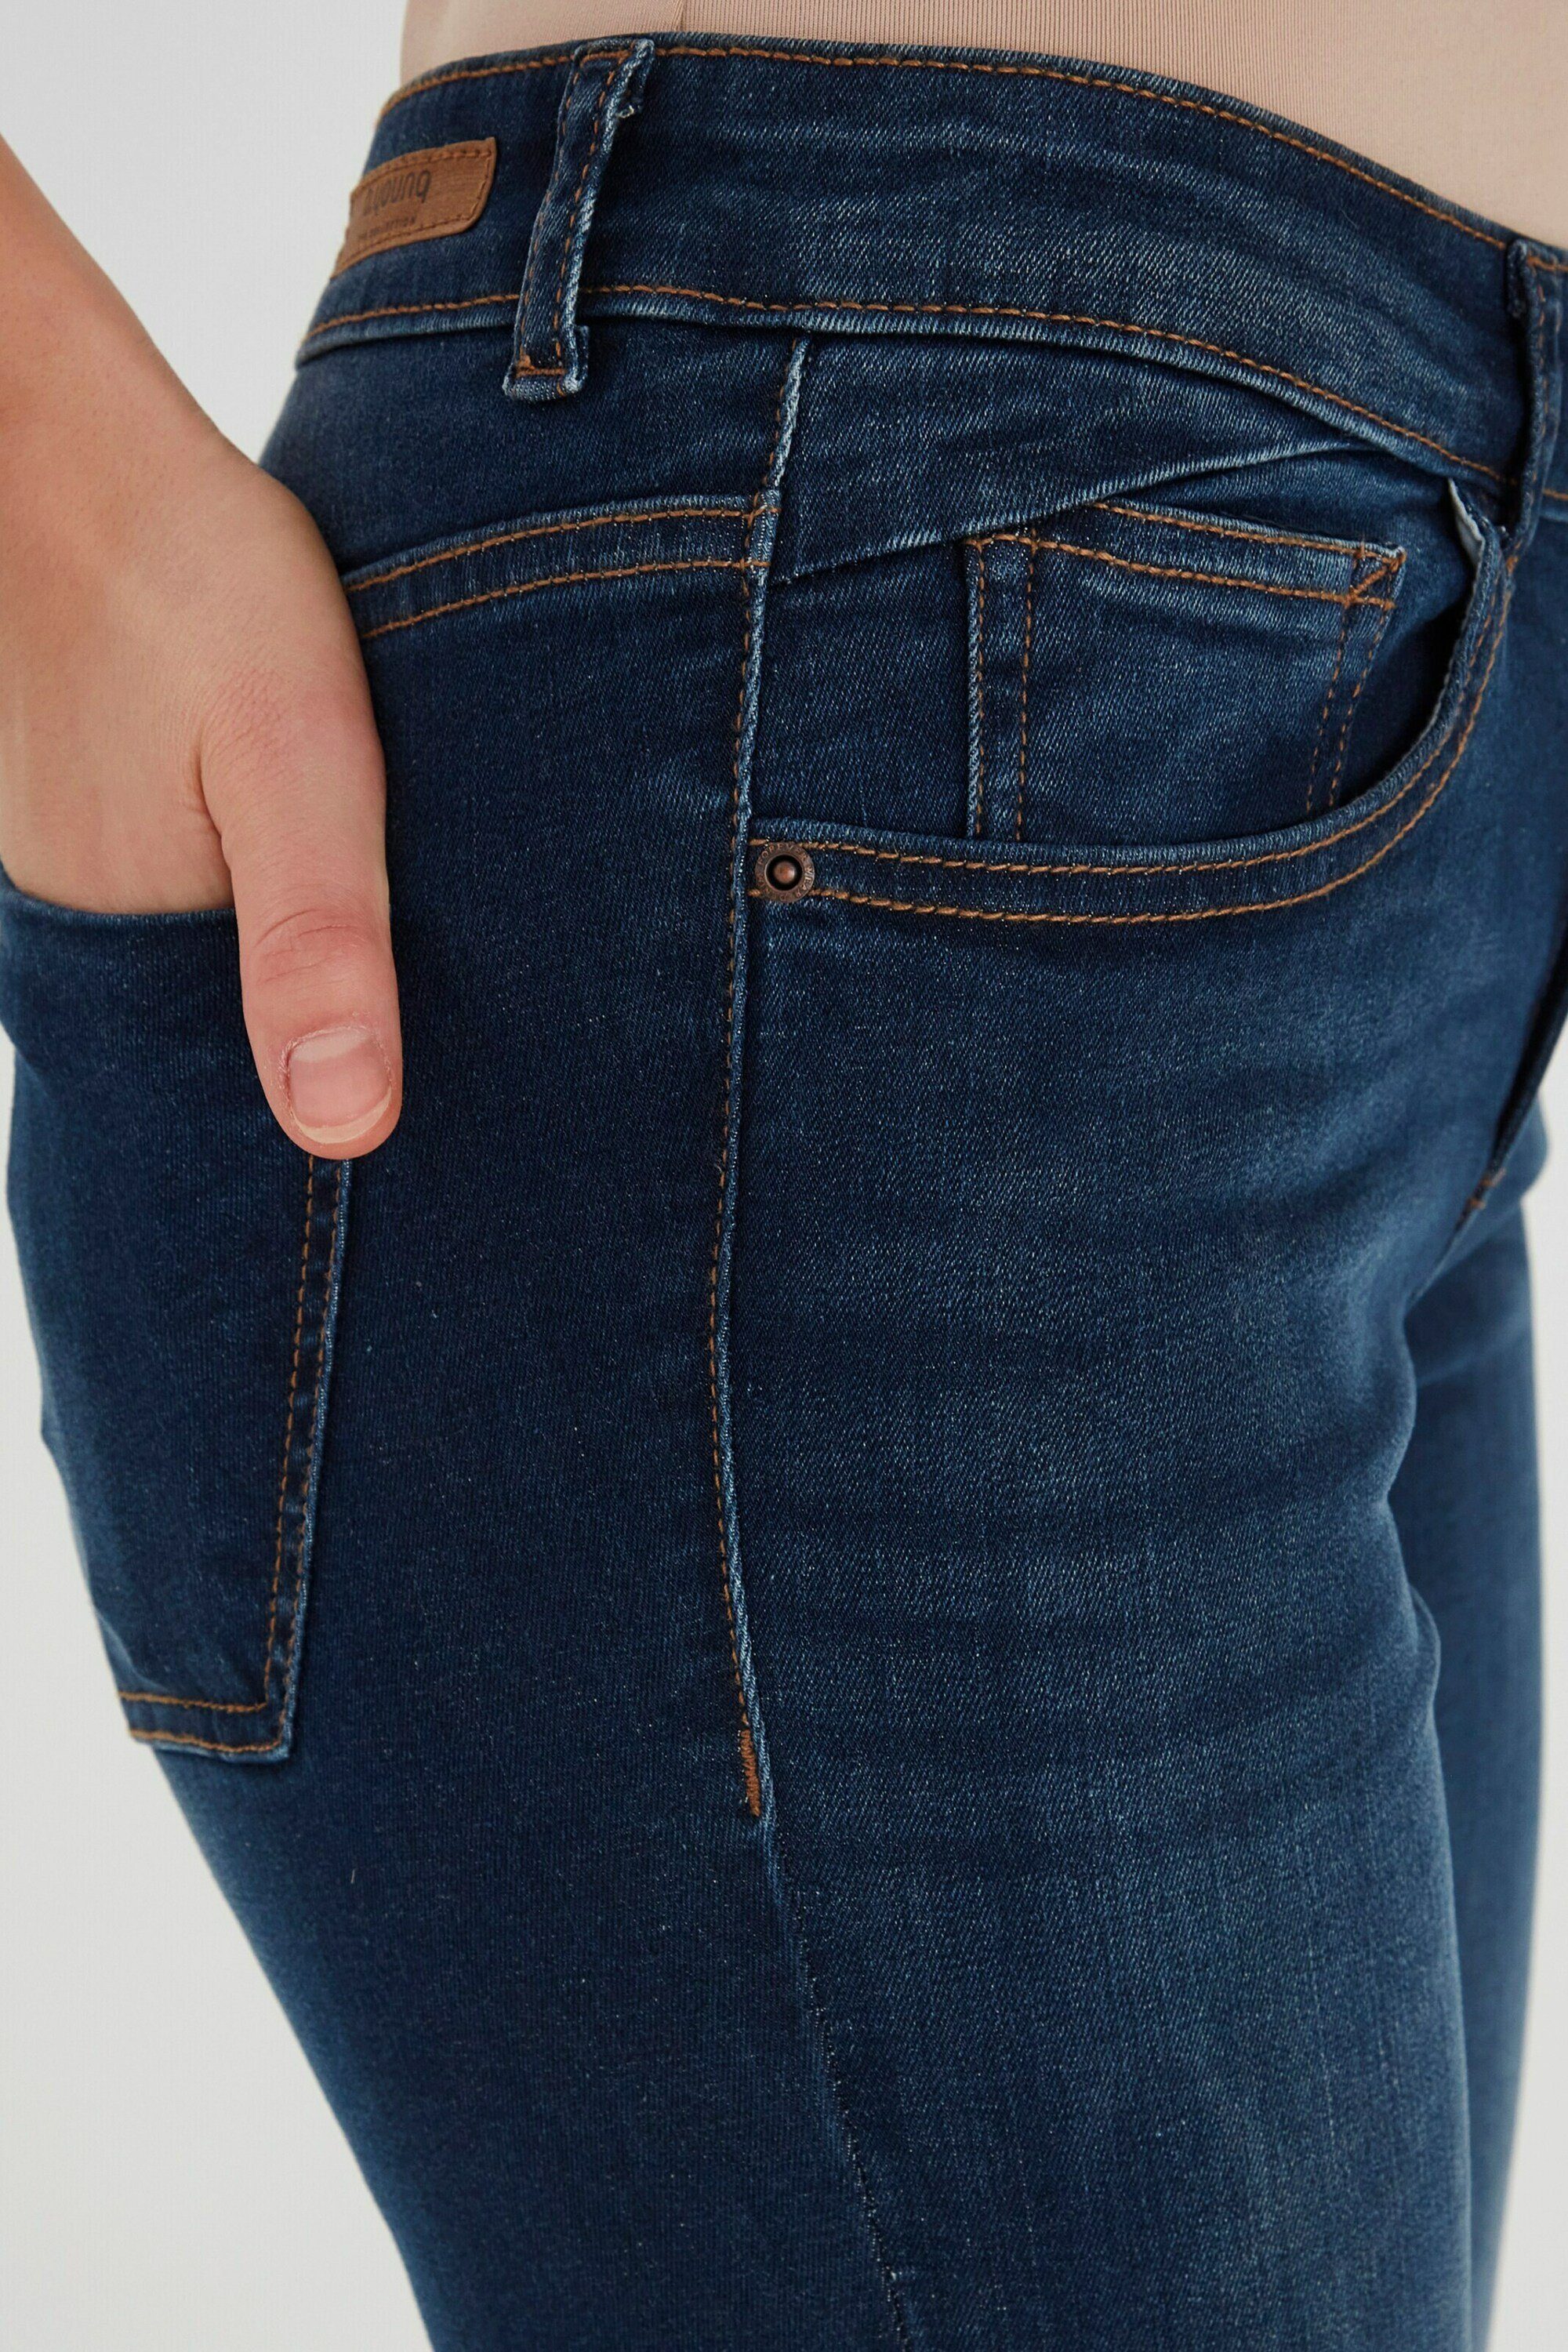 Details (1-tlg) Plain/ohne Detail, Lola Weiteres Luni b.young Skinny-fit-Jeans